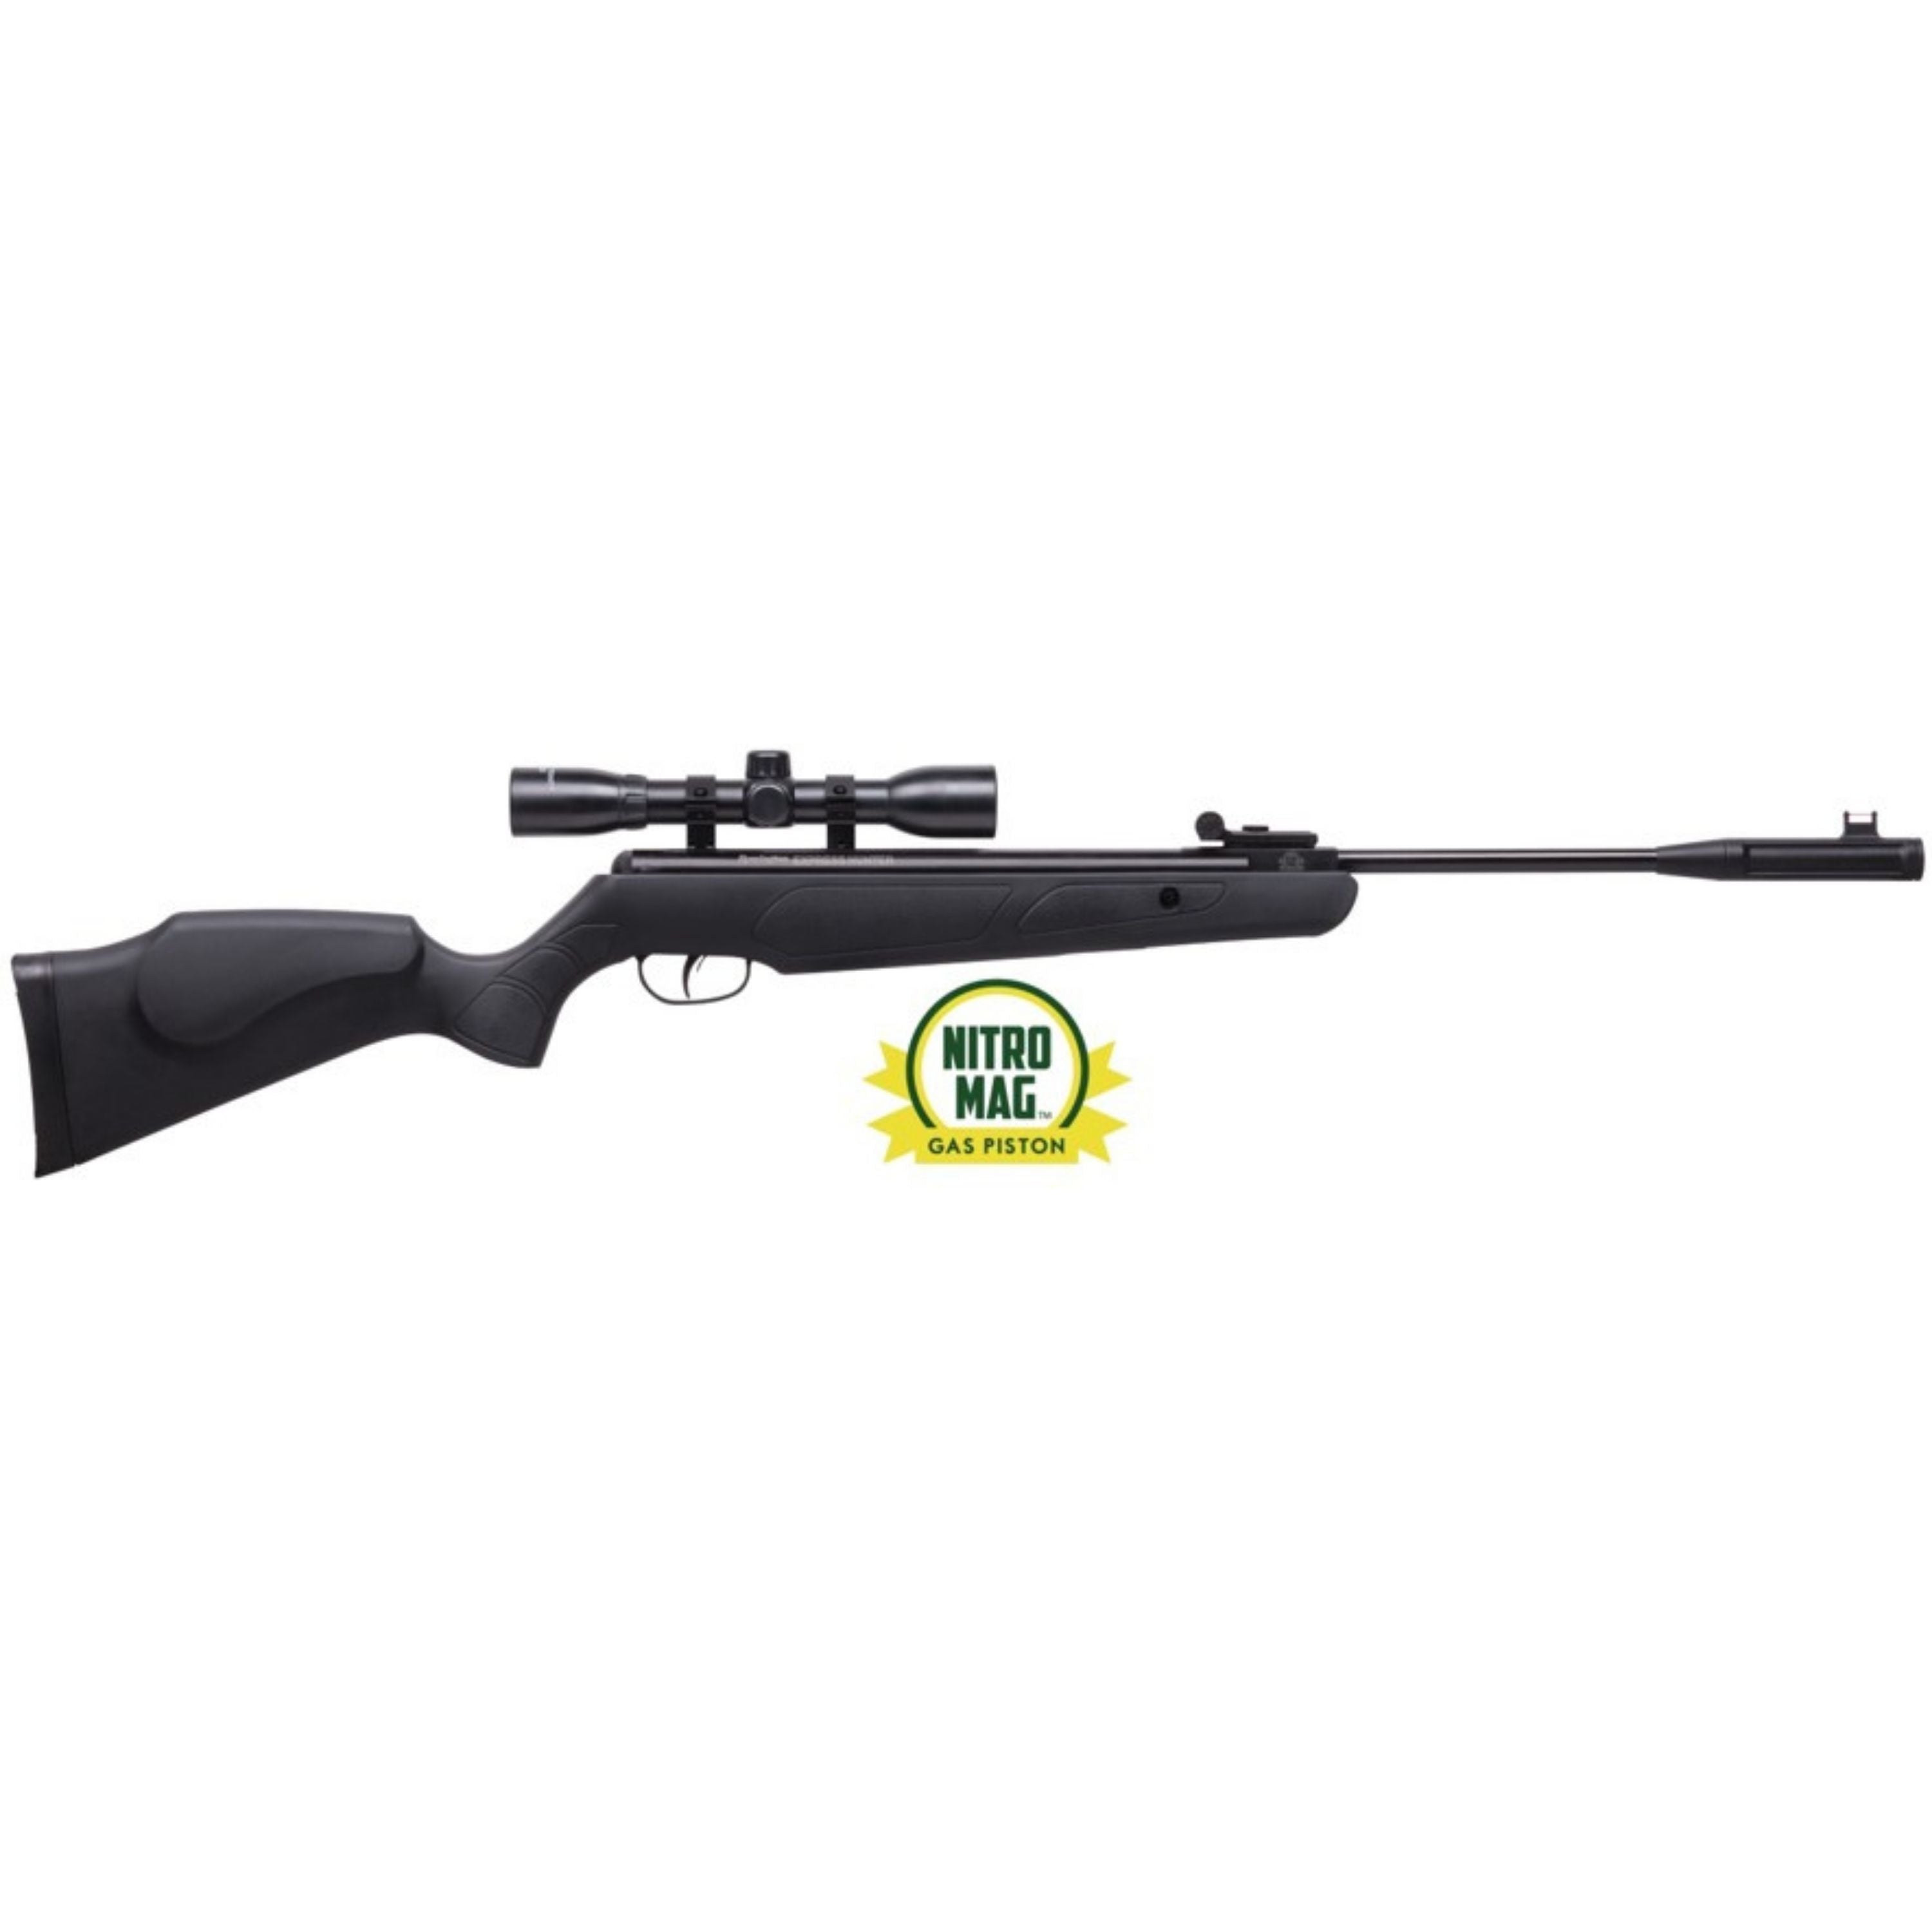 "Express Hunter" cal .177 (495 fps) air rifle with scope